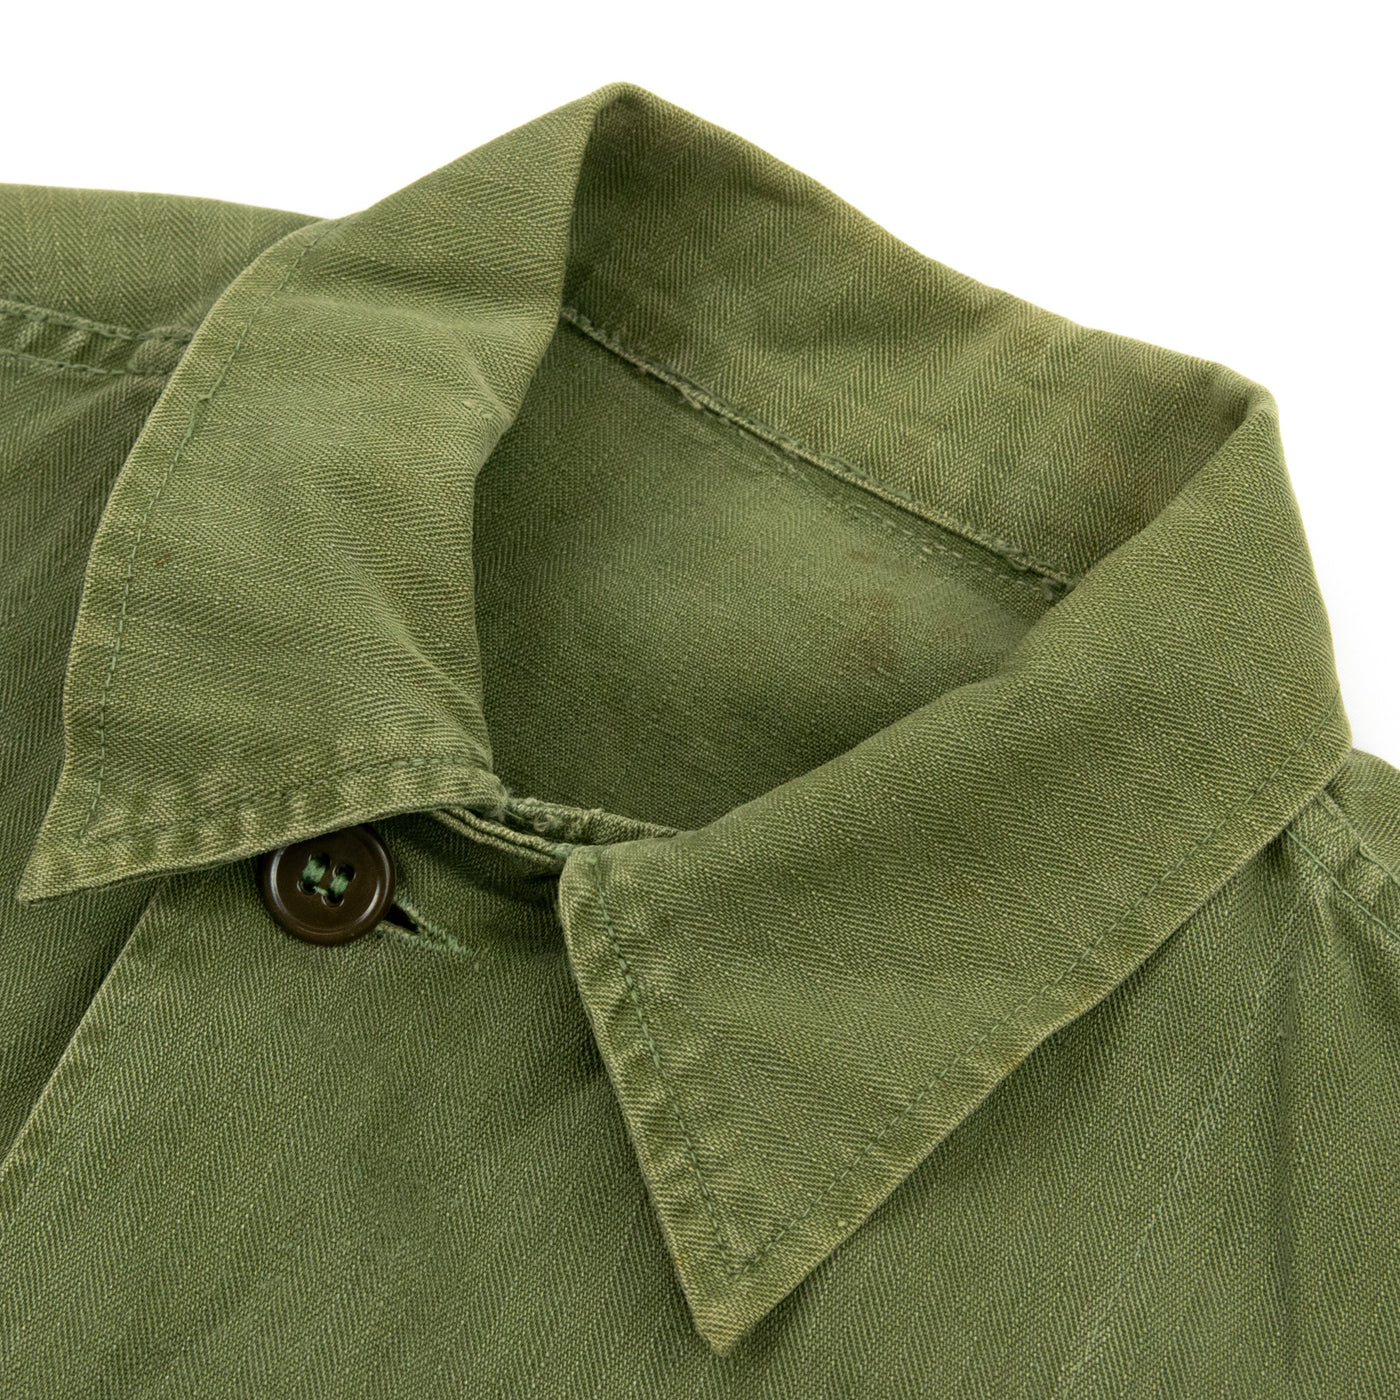 Vintage 1940s US Army WWII HBT Stencil Field Military Shirt Olive Green - S Collar